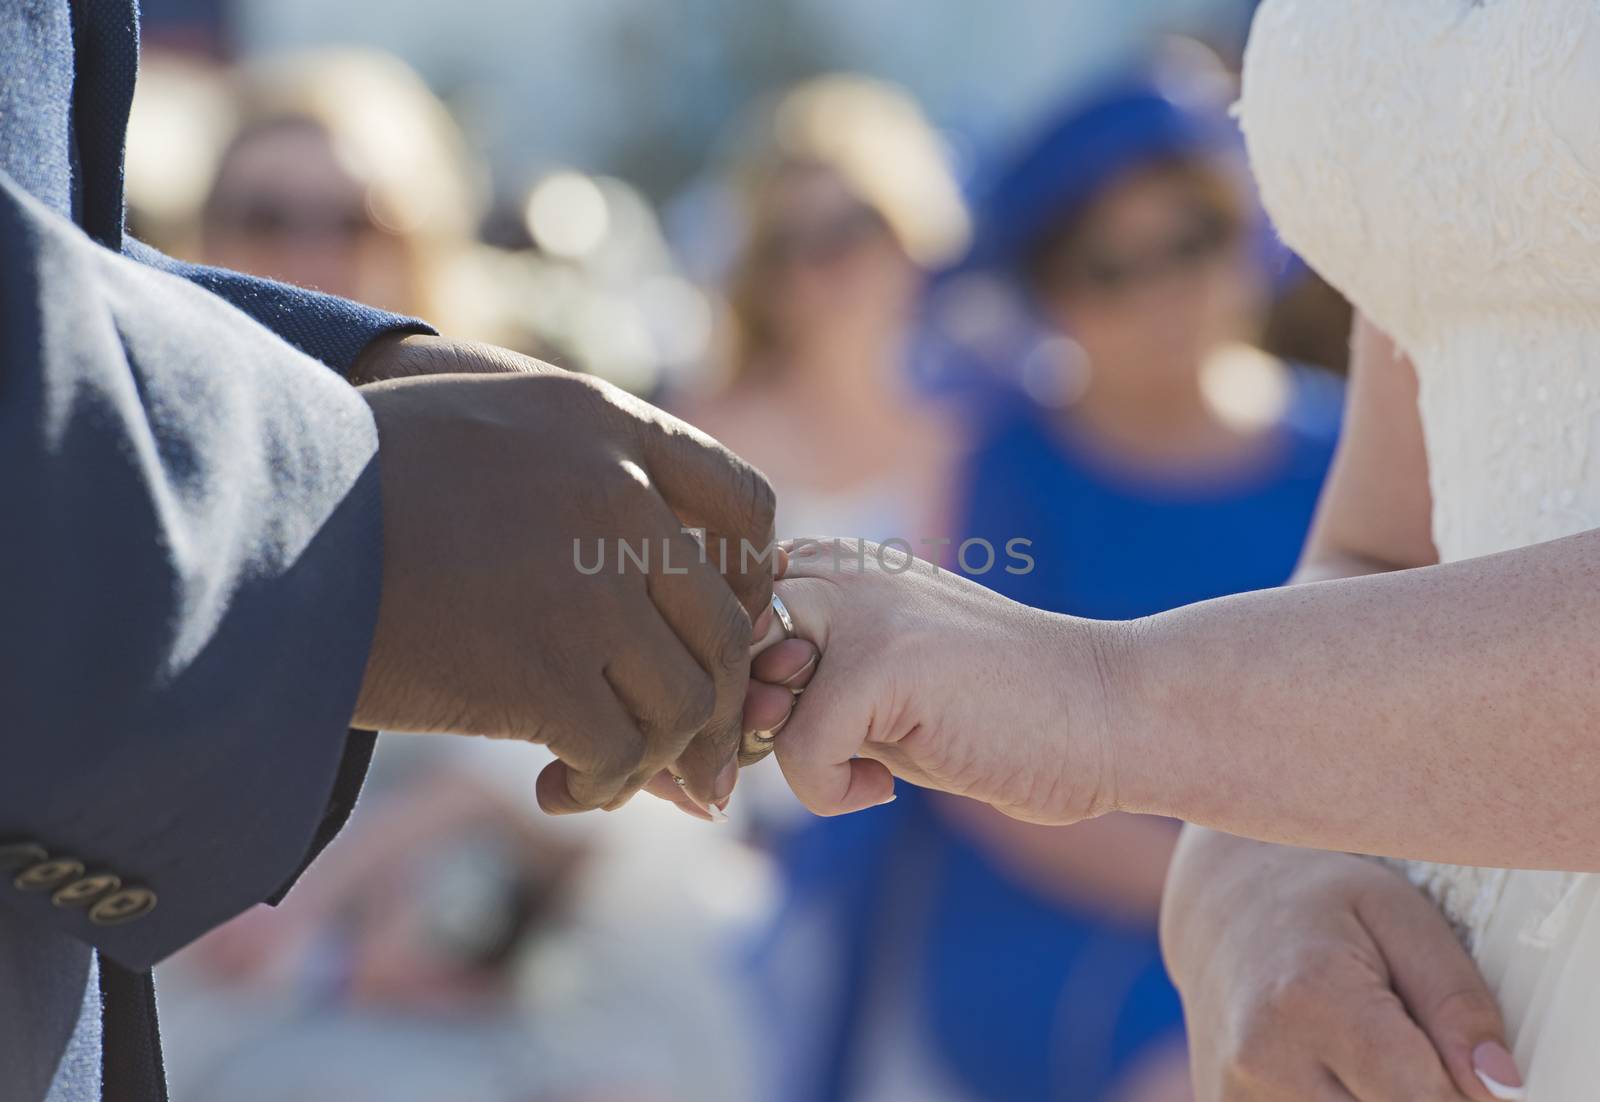 Groom placing a ring on brides finger at wedding ceremony with mixed race couple